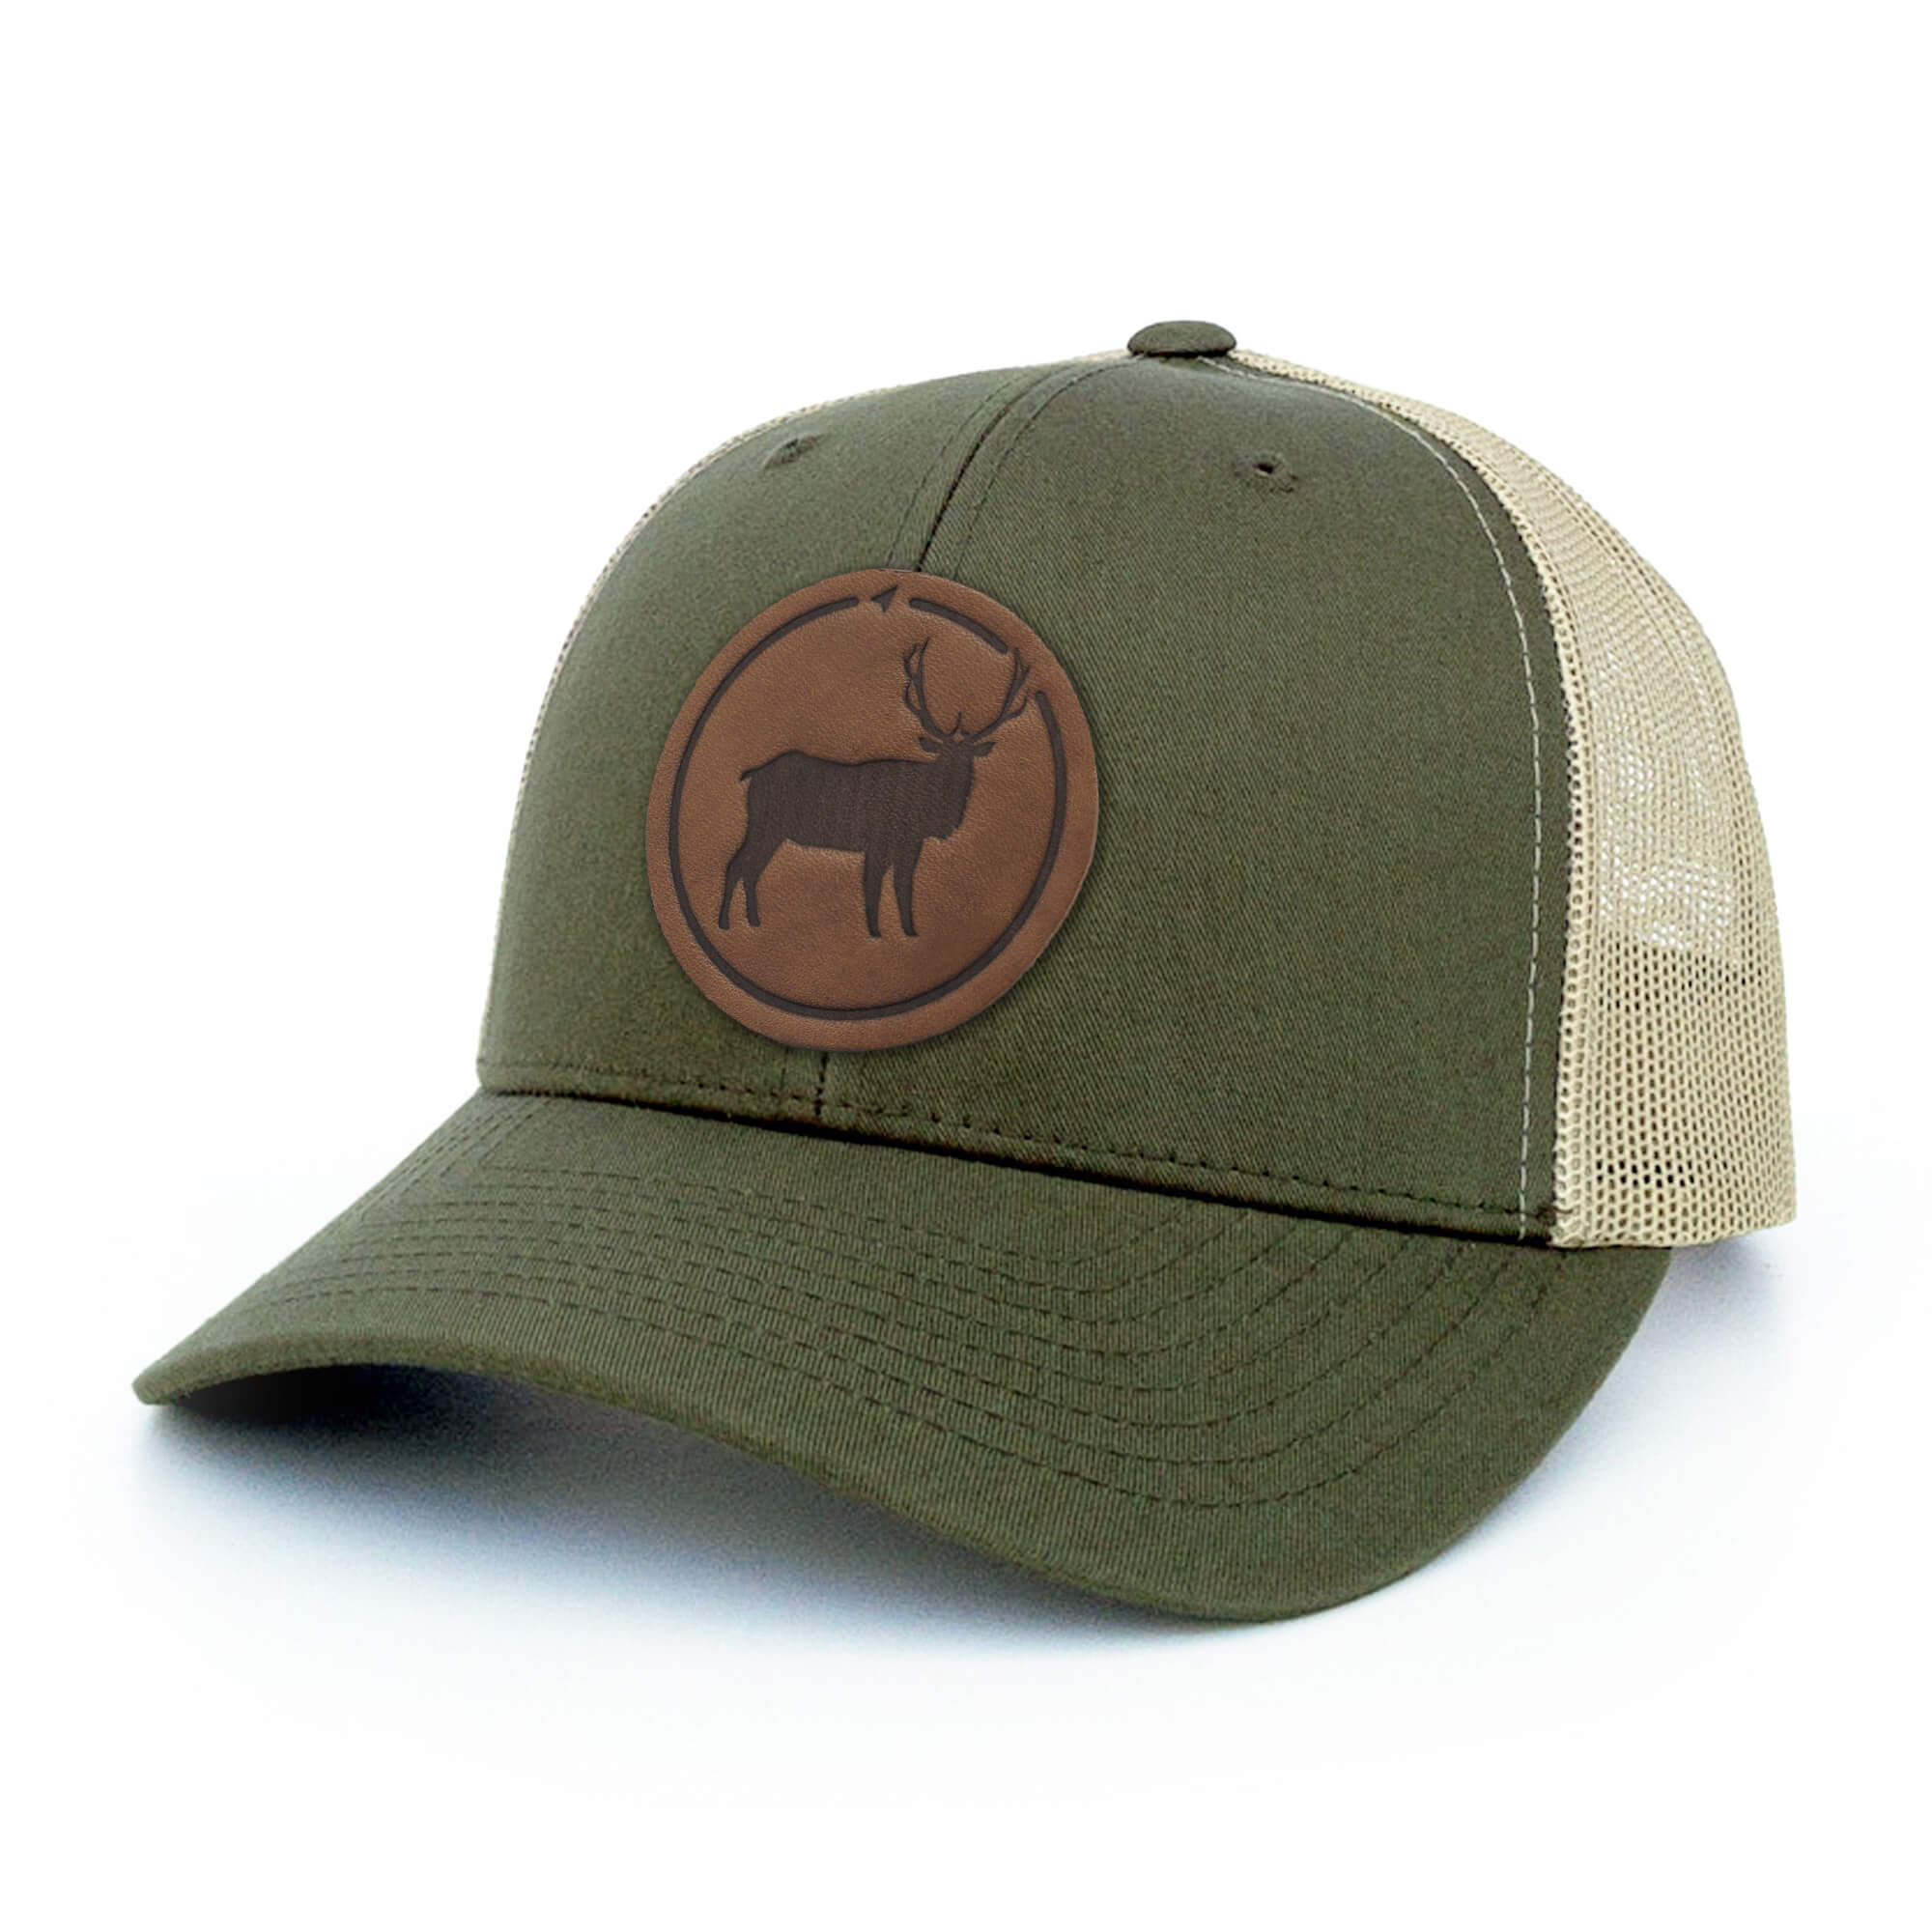 Moss Green and khaki trucker hat with full-grain leather patch of Elk | BLACK-004-006, CHARC-004-006, NAVY-004-006, HGREY-004-006, MOSS-004-006, BROWN-004-006